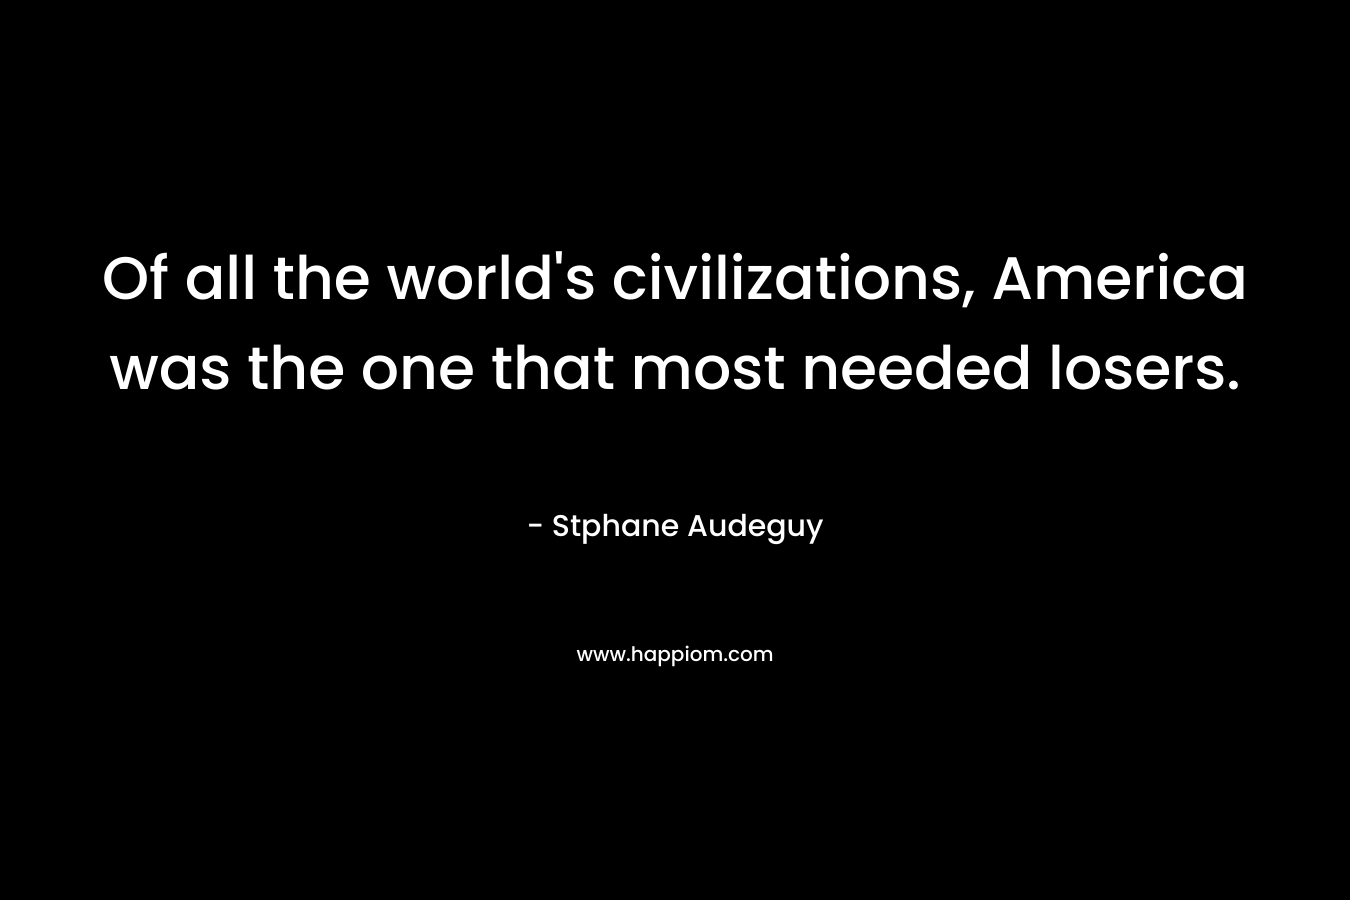 Of all the world’s civilizations, America was the one that most needed losers. – Stphane Audeguy